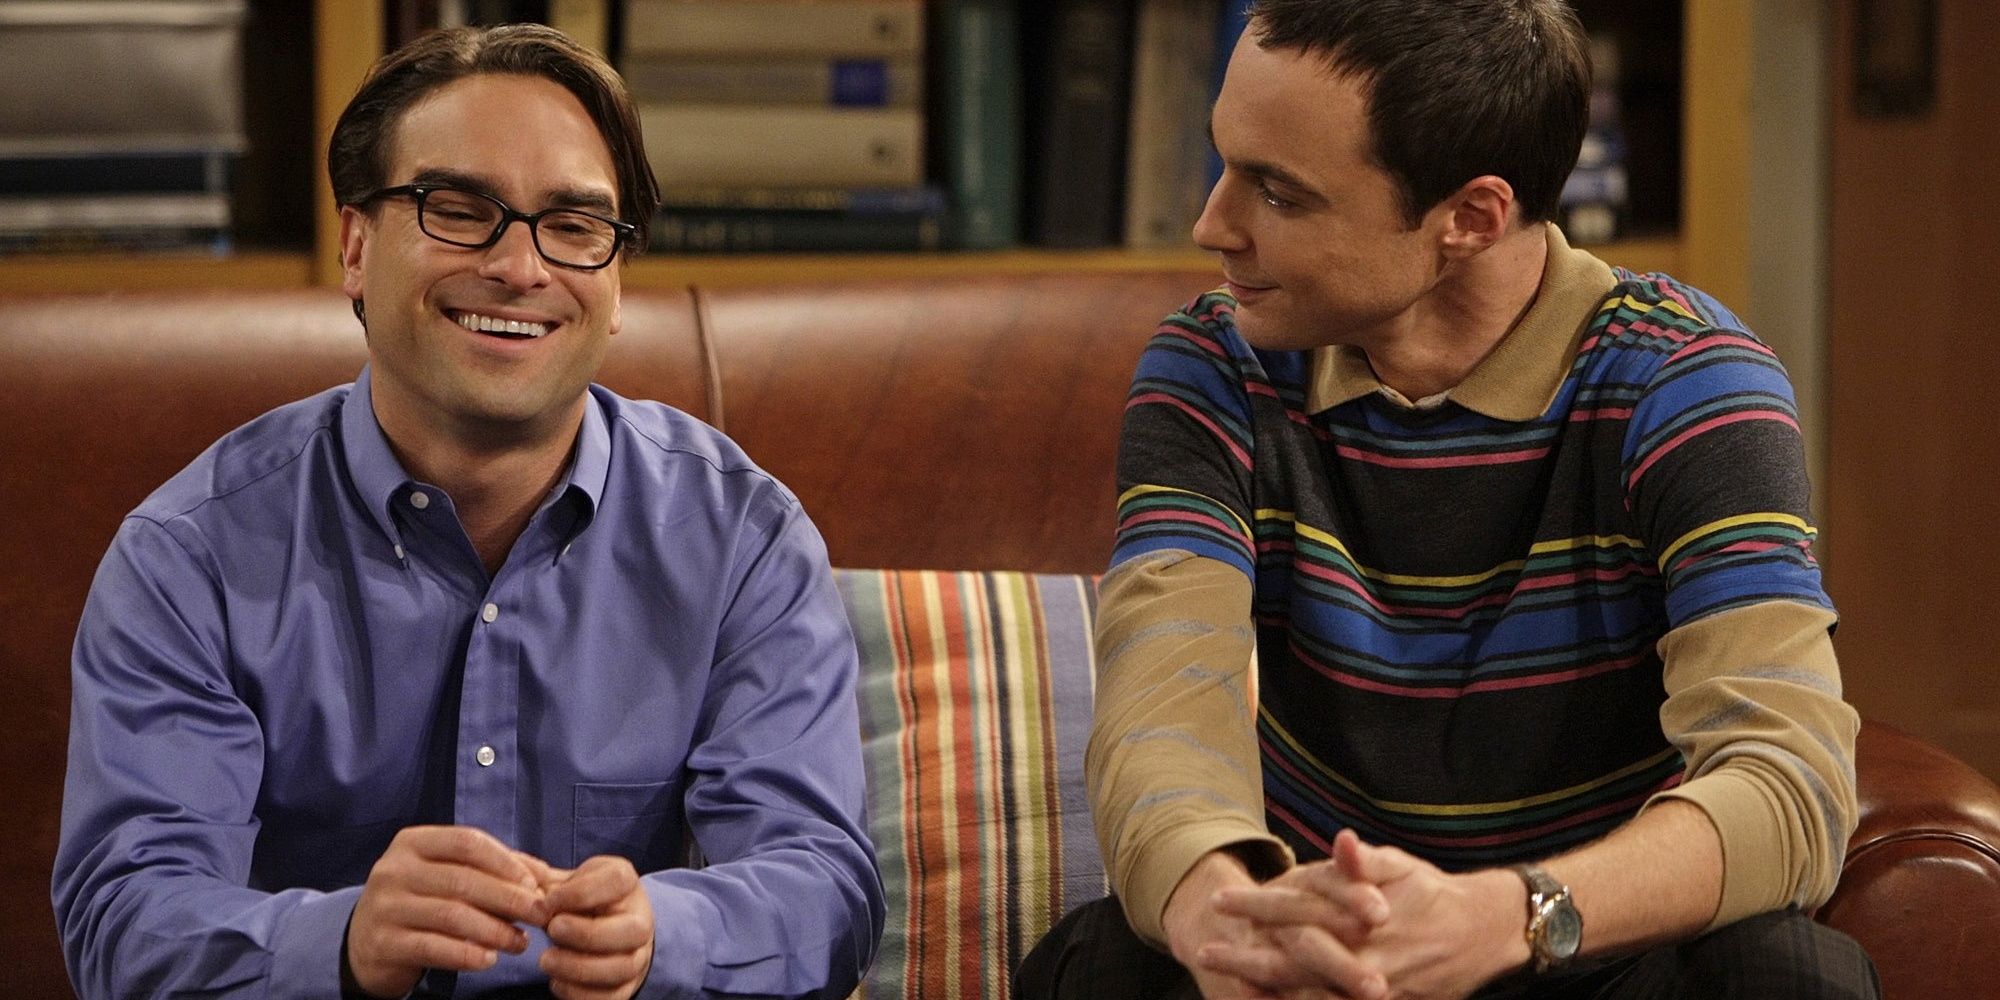 Leonard and sheldon from the big bang theory sat on the couch smiling